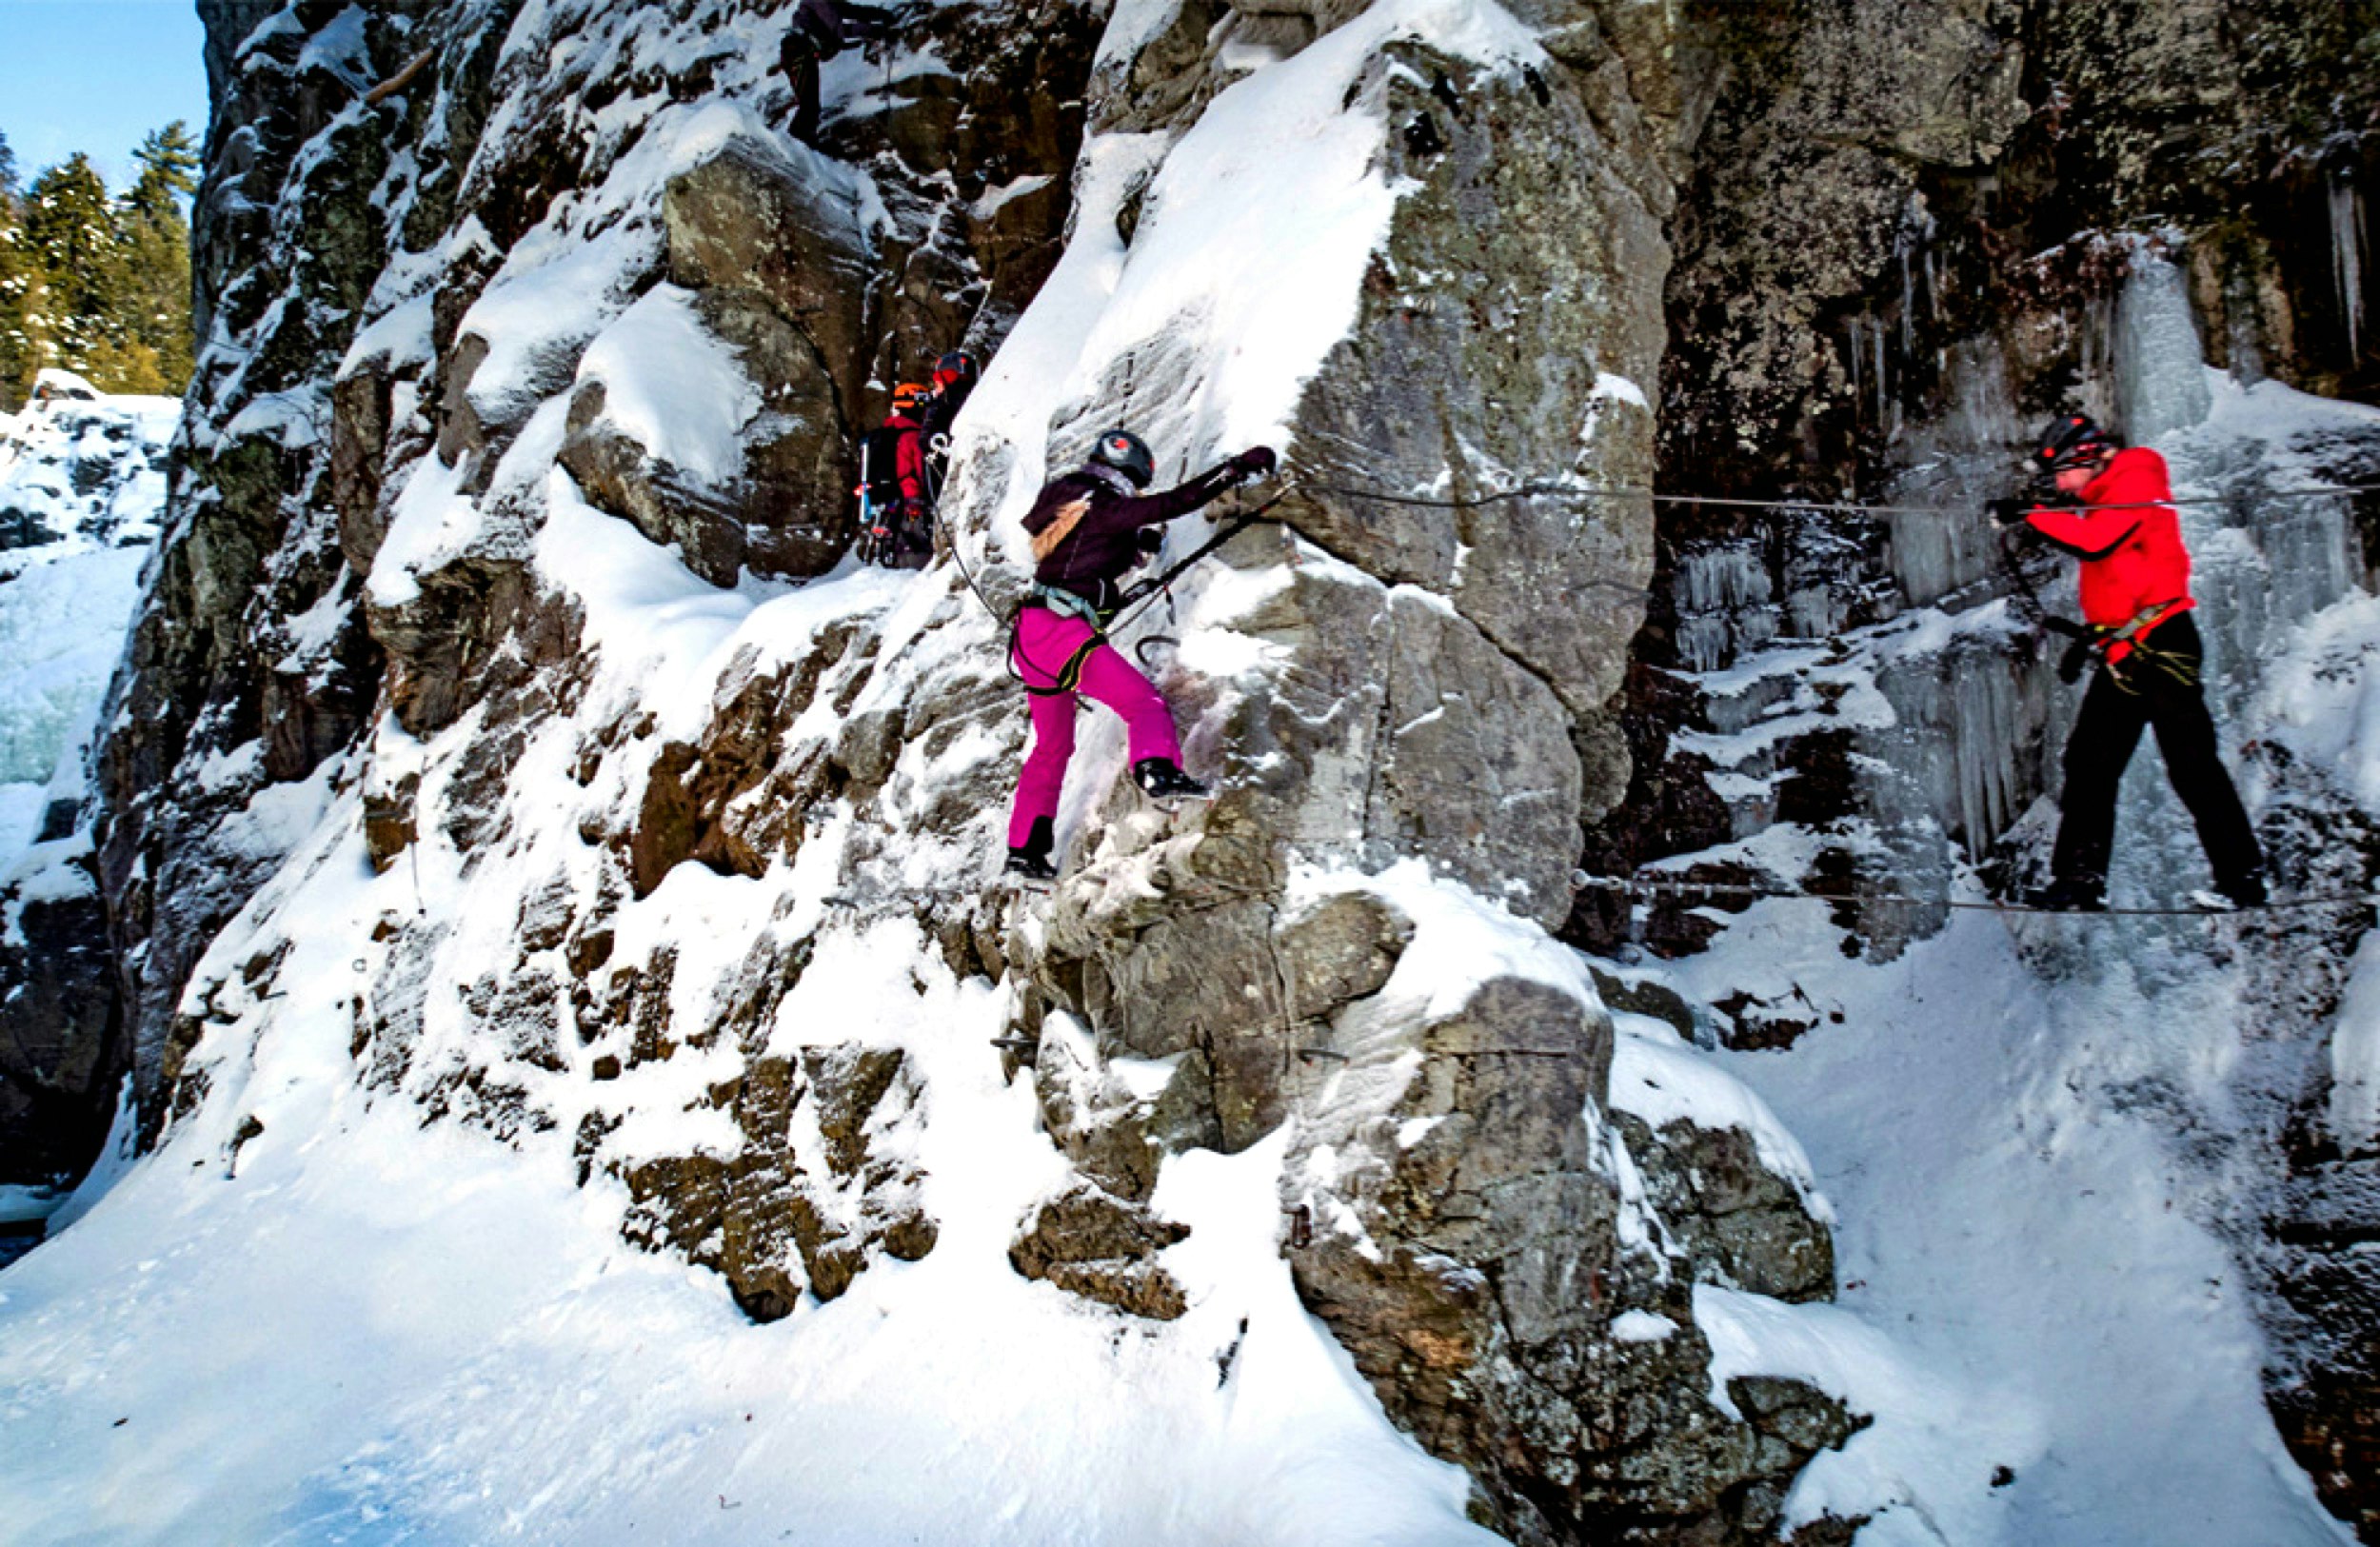 People use a via ferrata to cross a snowy cliff face